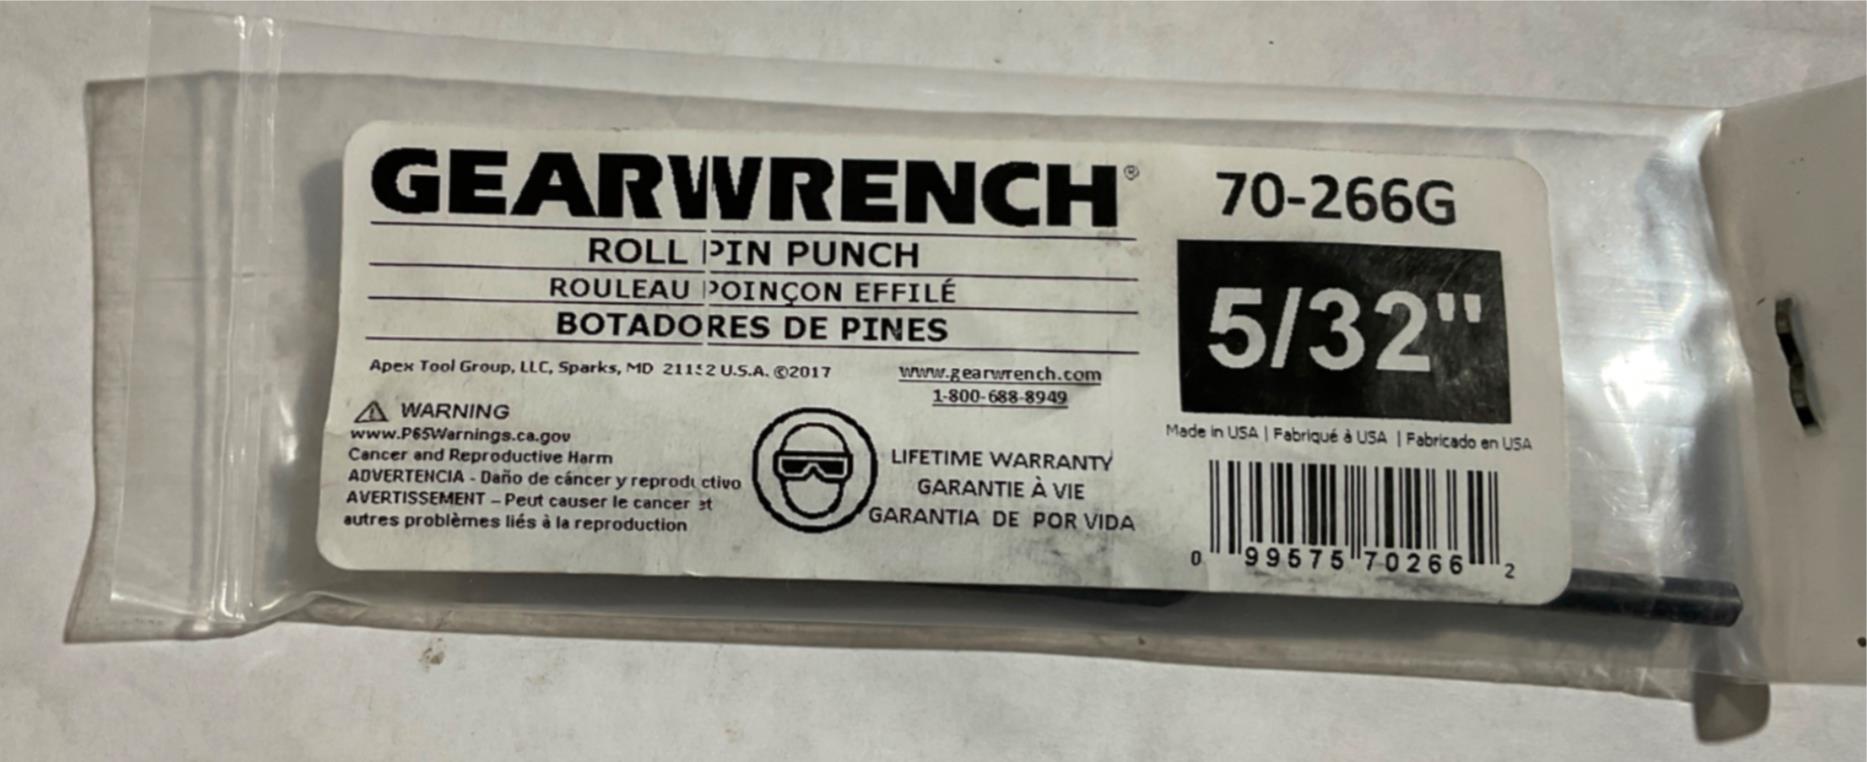 Gearwrench 70-266G 5/32" X 4-1/2" Roll Pin Punch USA